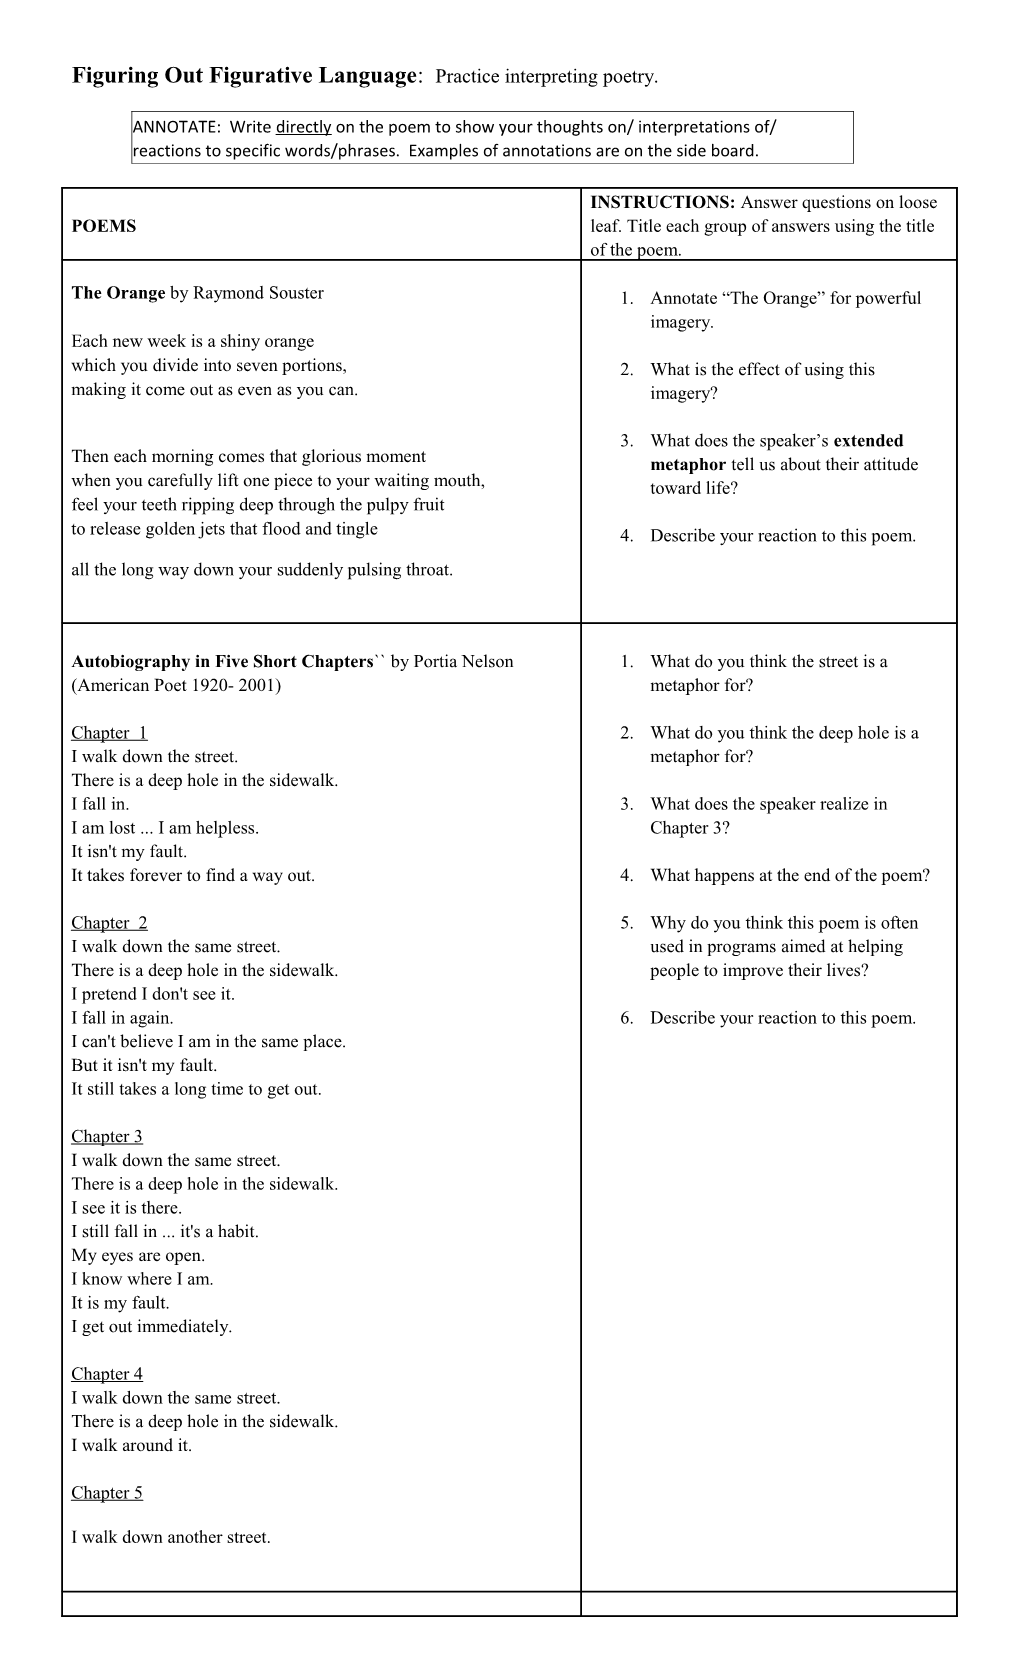 Figuring out Figurative Language: Practice Interpreting Poetry